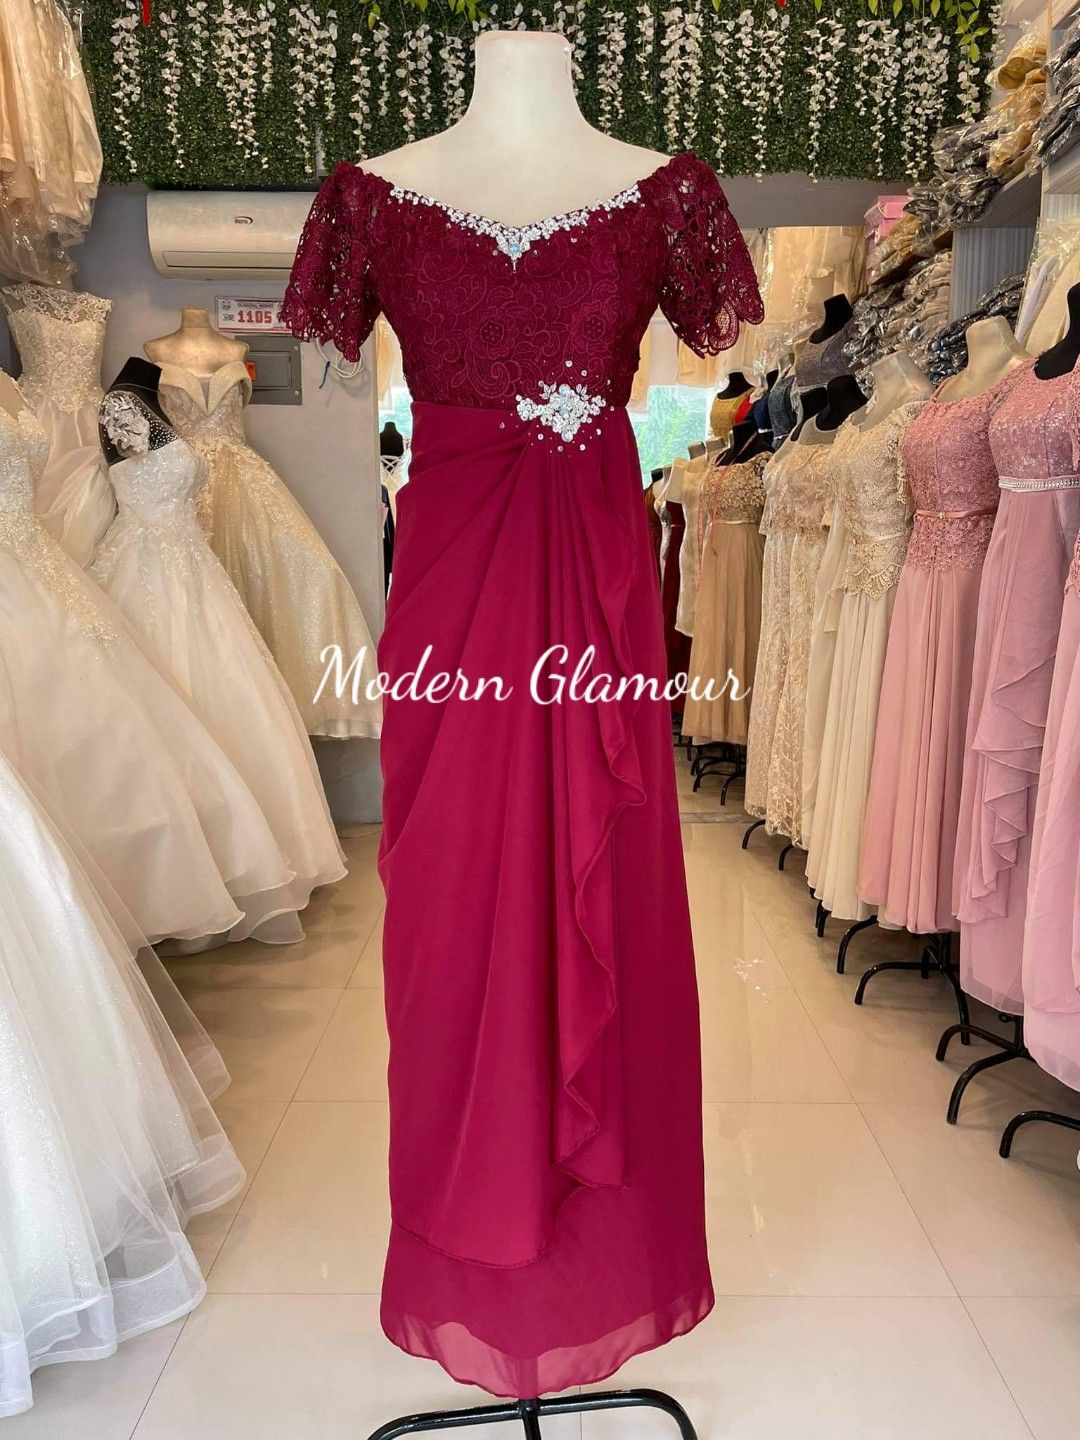 52 Sponsor gown ideas | gowns, bridesmaid dresses, mother of the bride  dresses